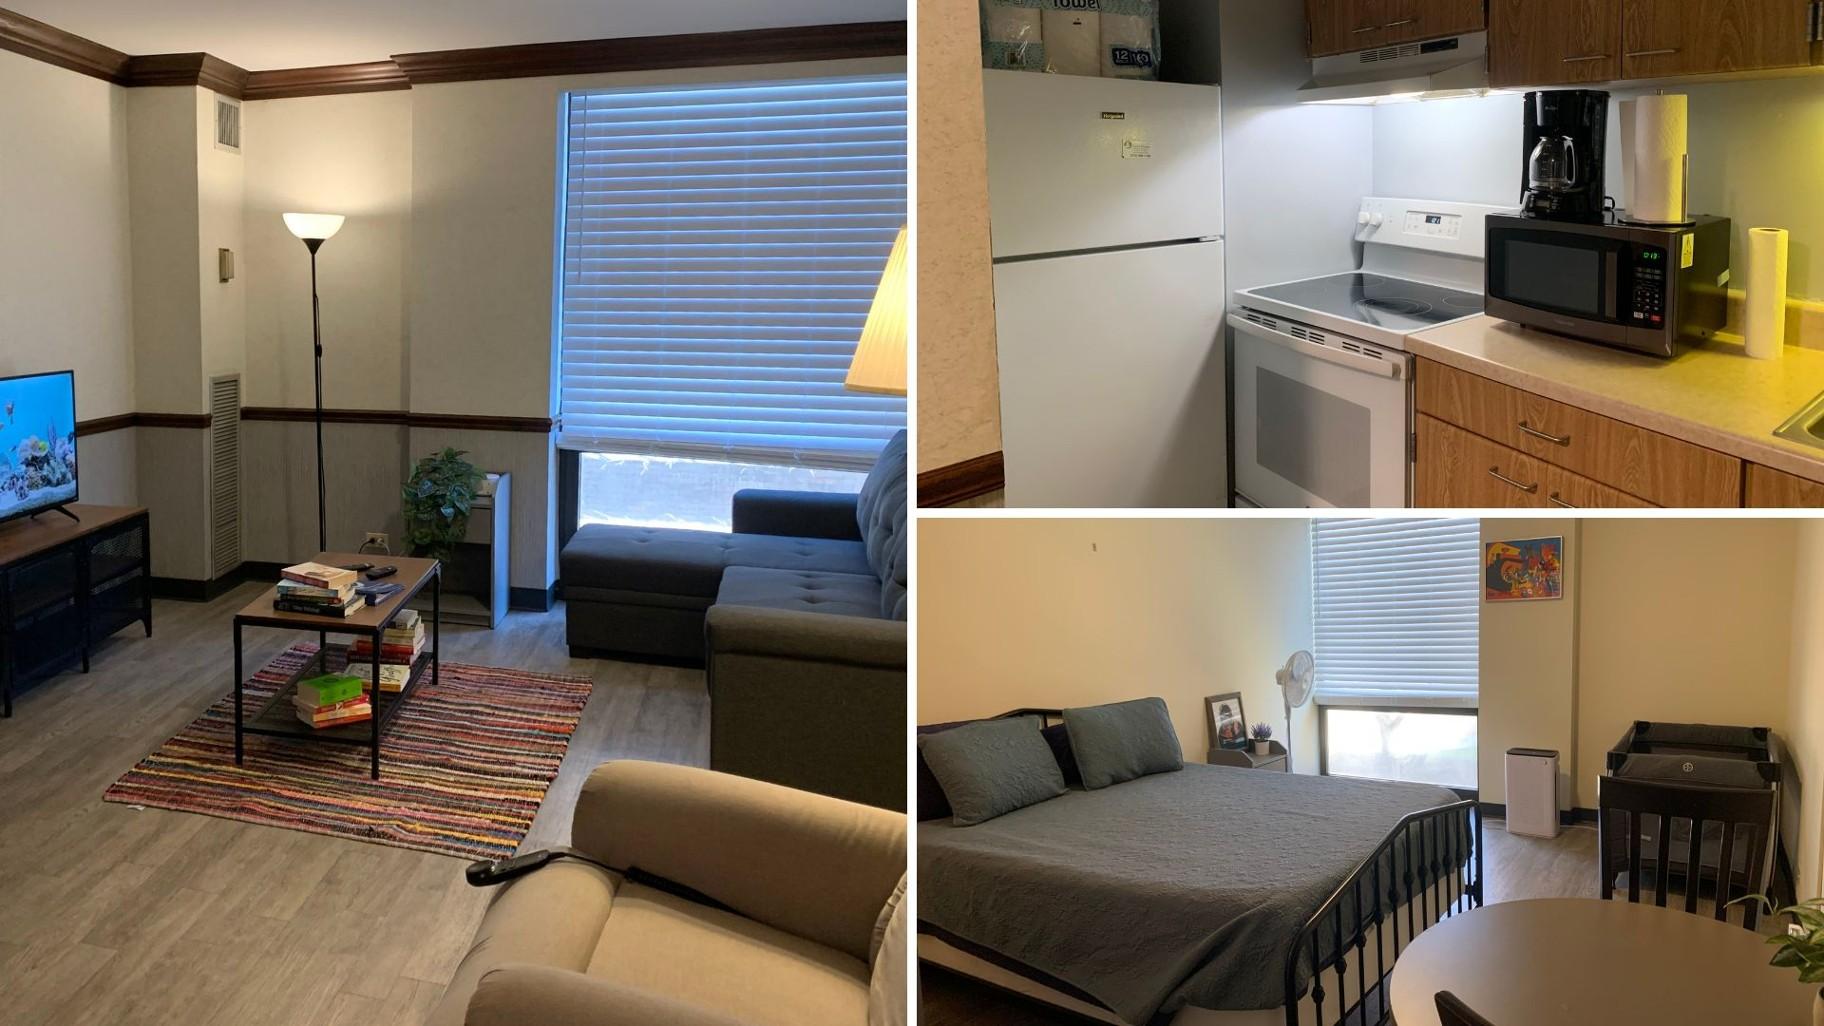 Guest House’s 47 fully furnished apartments are contained within several floors of a student residence hall that the nonprofit leases from the University of Illinois Chicago. (Eunice Alpasan / WTTW News)